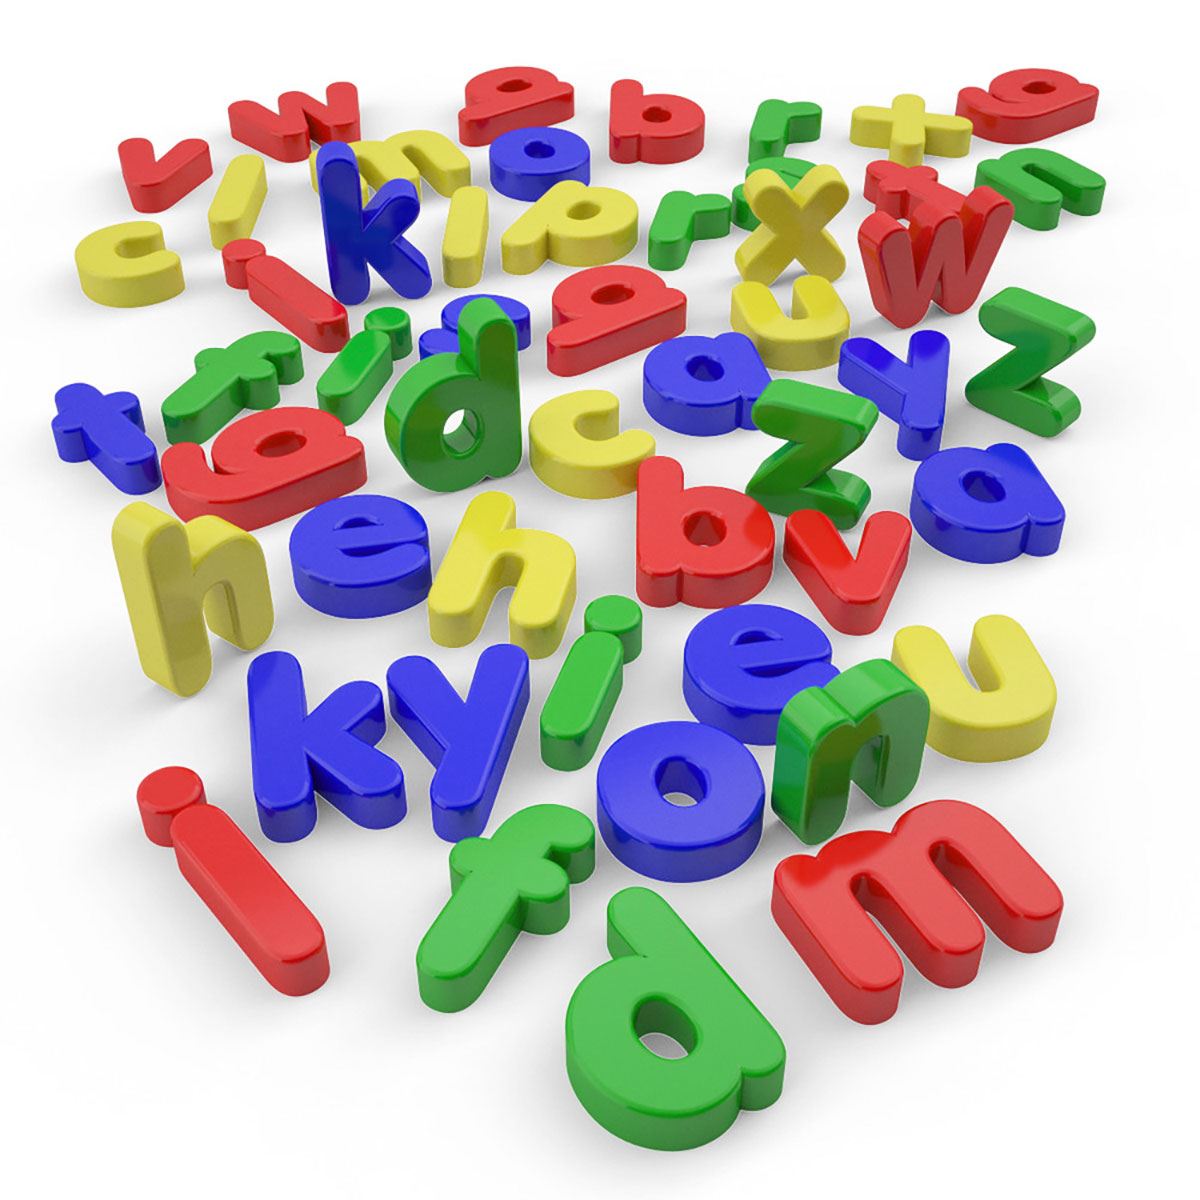 Show-me Magnetic Lowercase Letters - Tub of 286